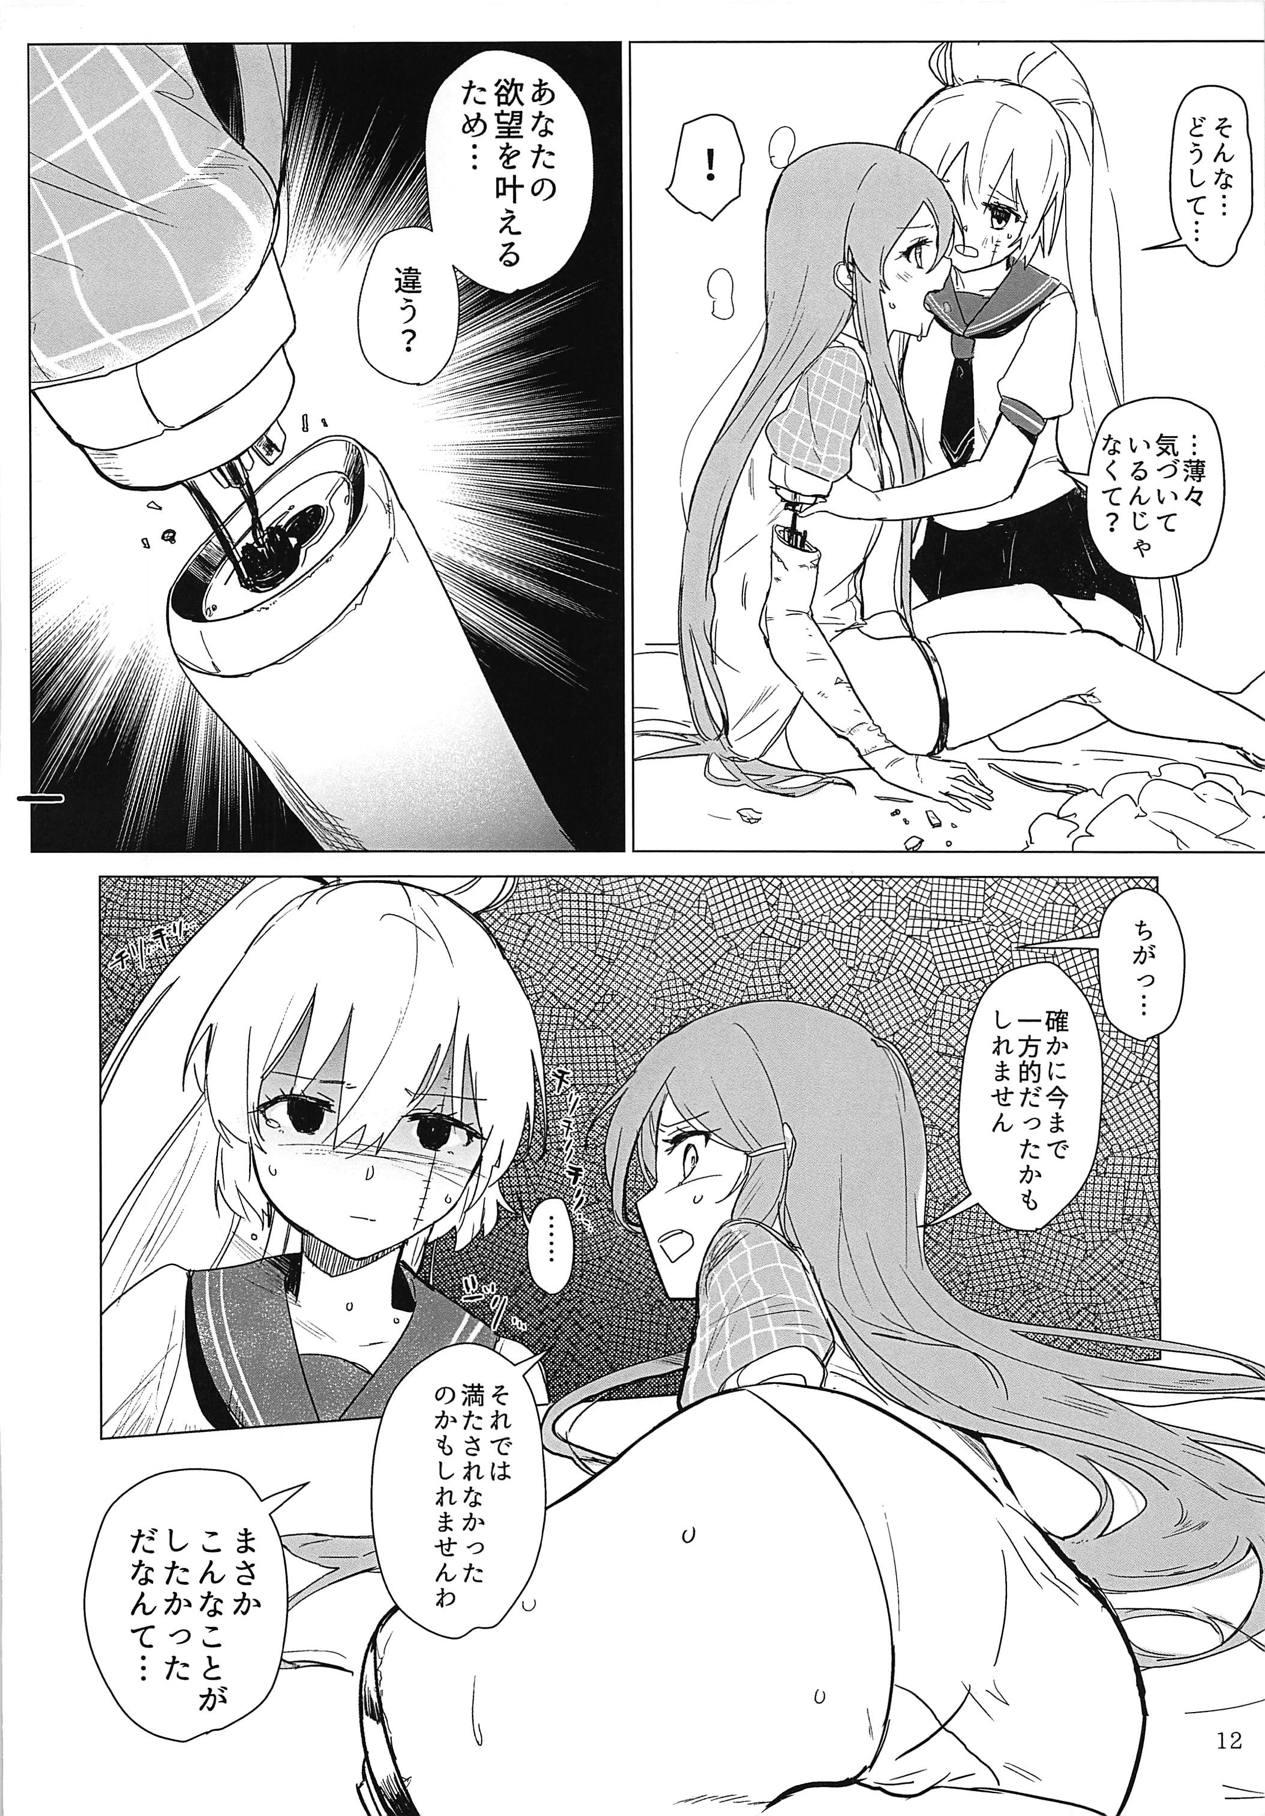 Moaning Sweet Poison in Noble Blend - Akuma no riddle Rola - Page 11